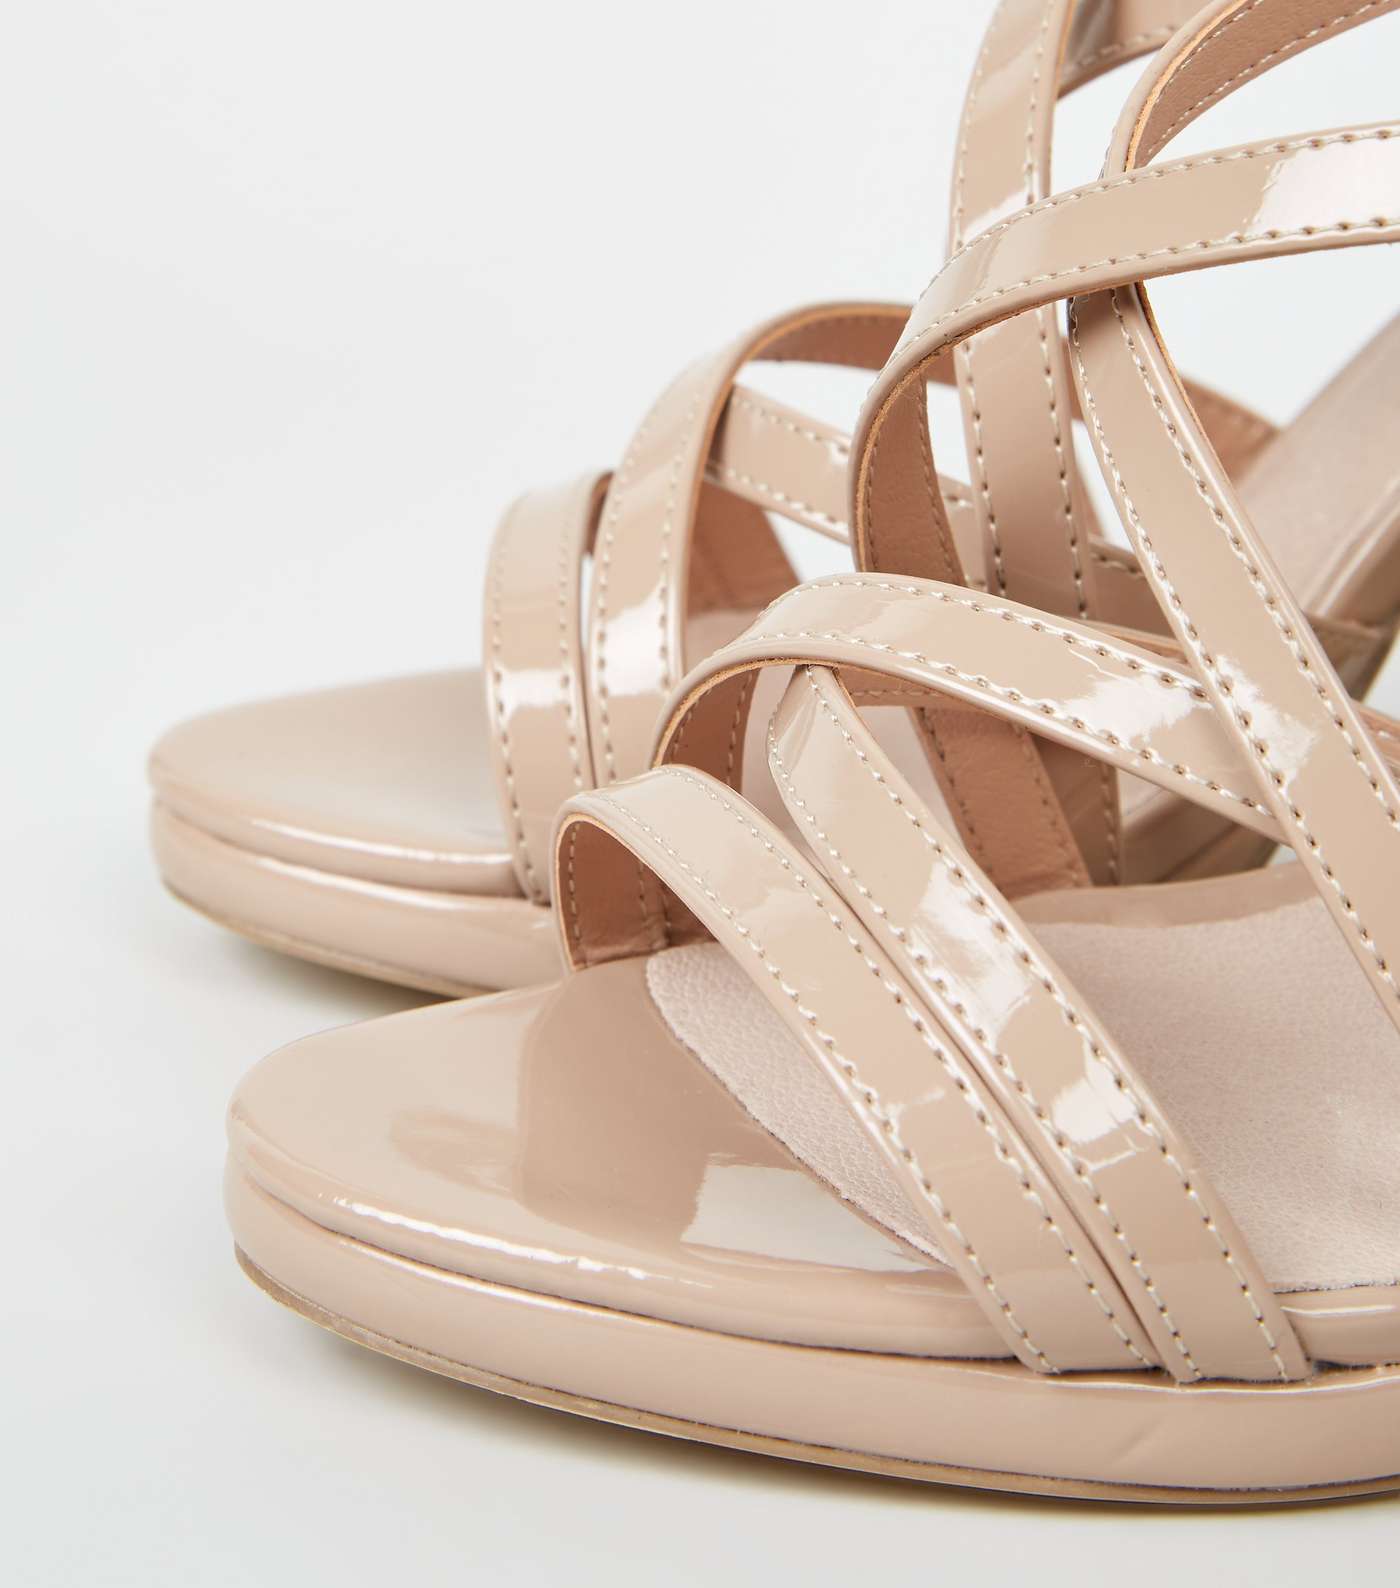 Nude Comfort Flex Patent Strappy Heeled Sandals Image 4